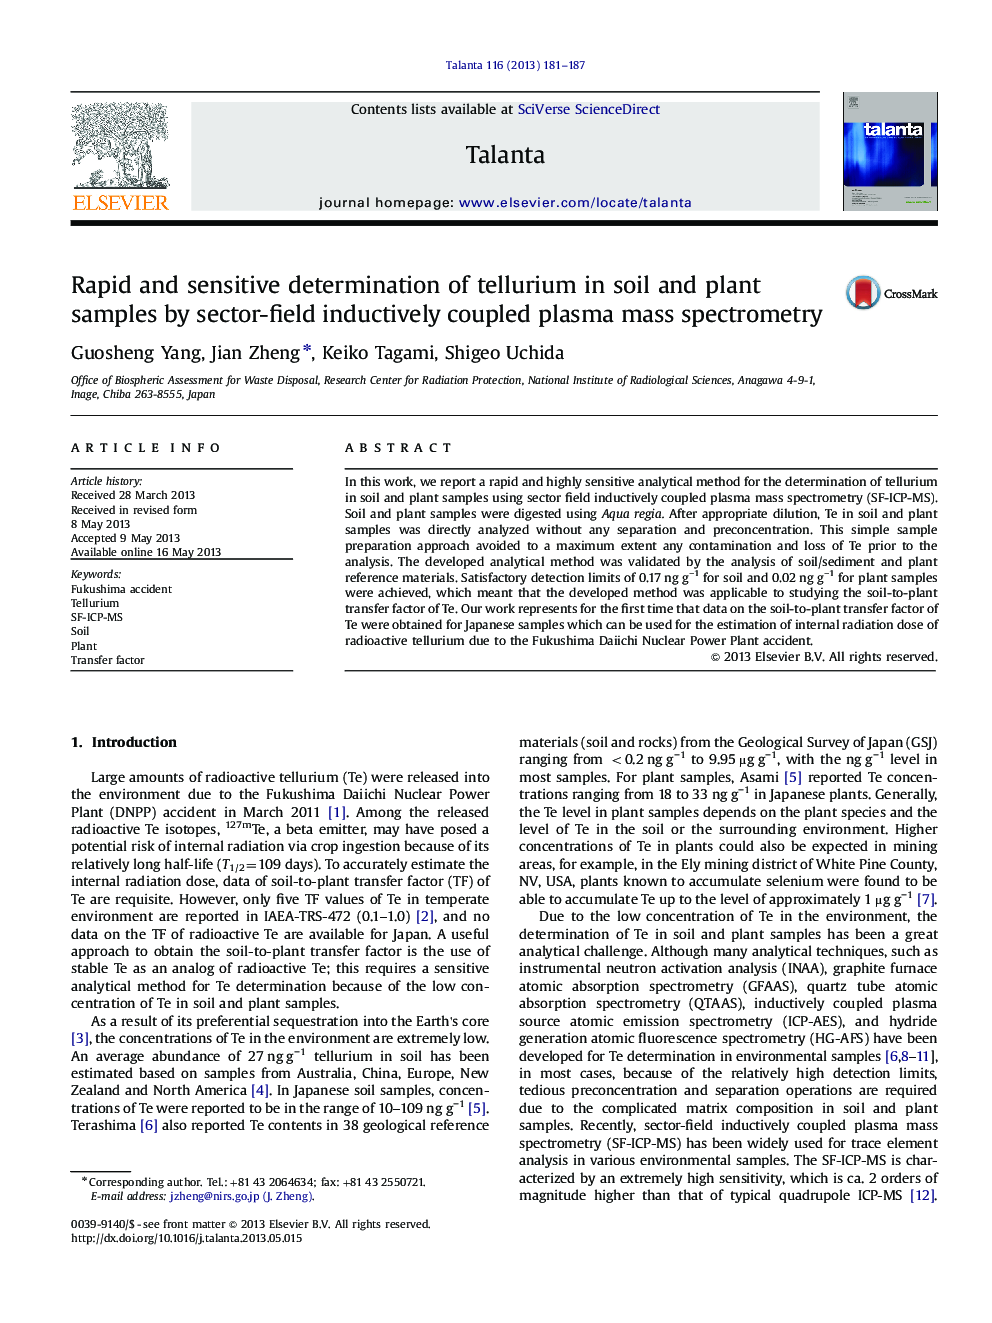 Rapid and sensitive determination of tellurium in soil and plant samples by sector-field inductively coupled plasma mass spectrometry